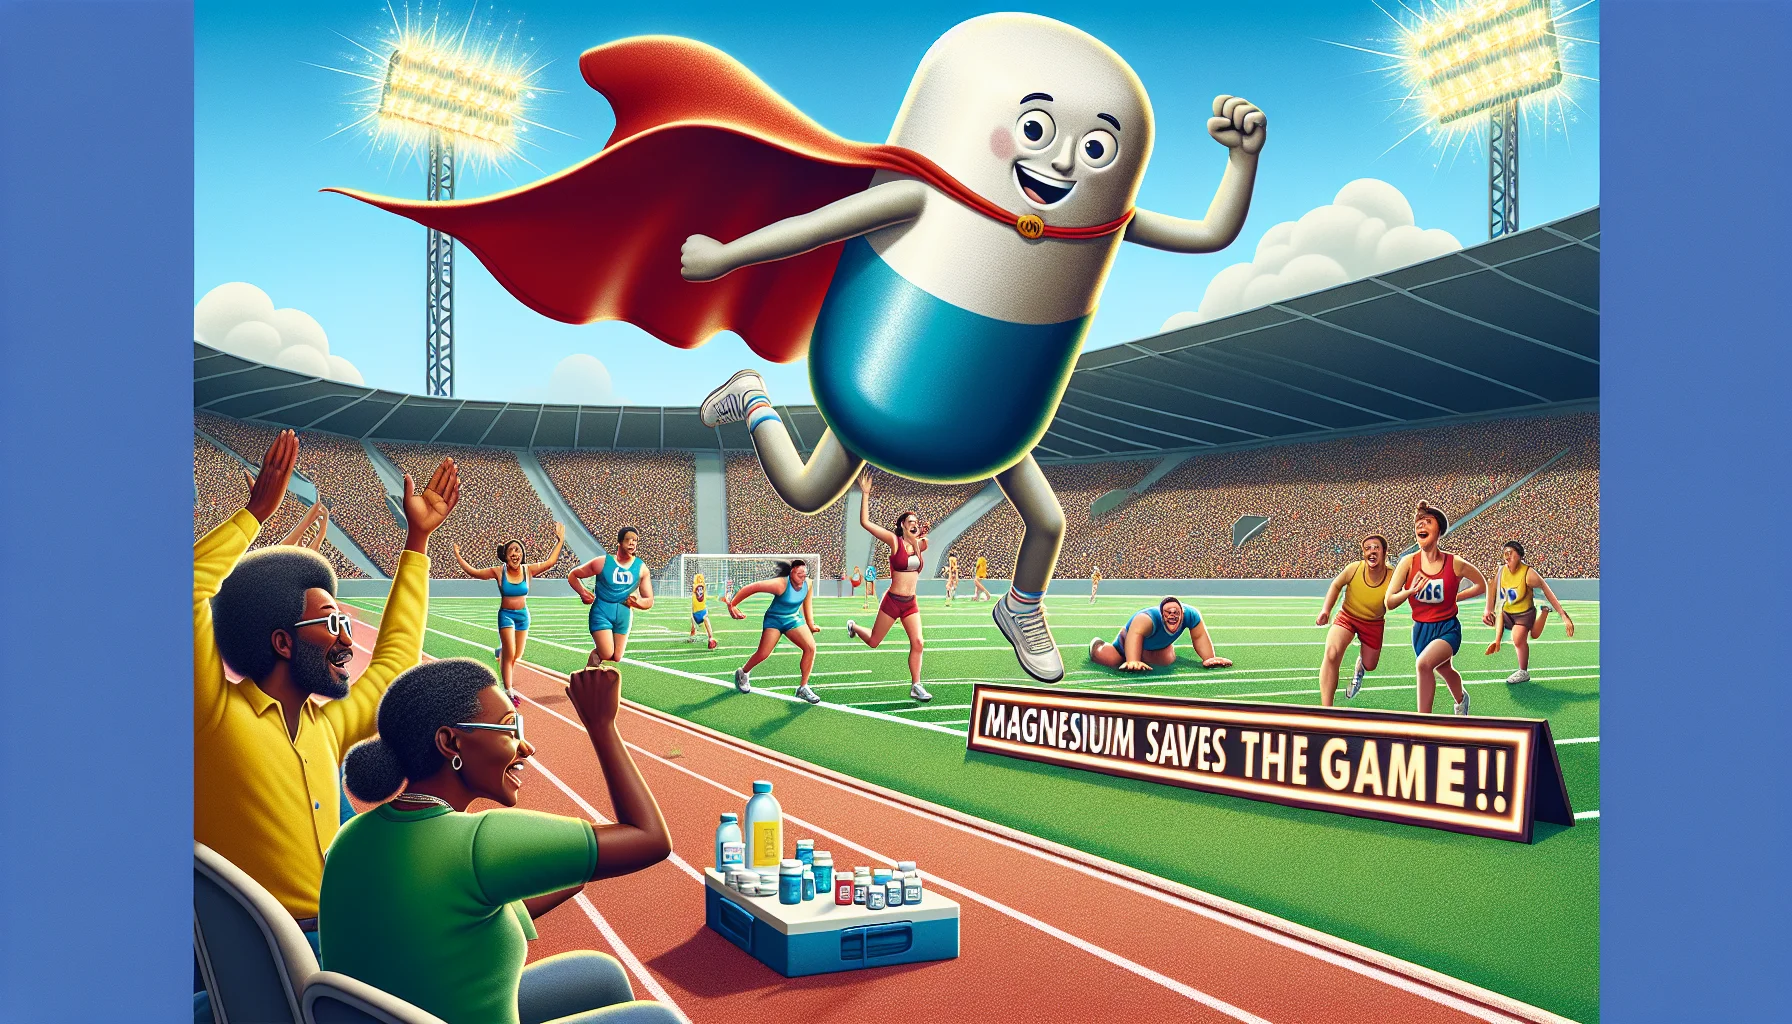 Create an image depicting a humorous scenario involving magnesium playing a crucial role in preventing cardiac arrest during a sports event. Picture this: a giant, lively anthropomorphic magnesium pill, wearing a superhero cape, is seen swooping down onto a sports field where an intense game is underway. One of the players, a Black woman in her athletic gear, shows signs of fatigue. In response, the hero pill revives her energy with a sparkling magnesium glow. Onlookers, comprising of a diverse group of people, cheer on in surprise and amusement. The scoreboard in the background humorously reads: 'Magnesium Saves The Game!'